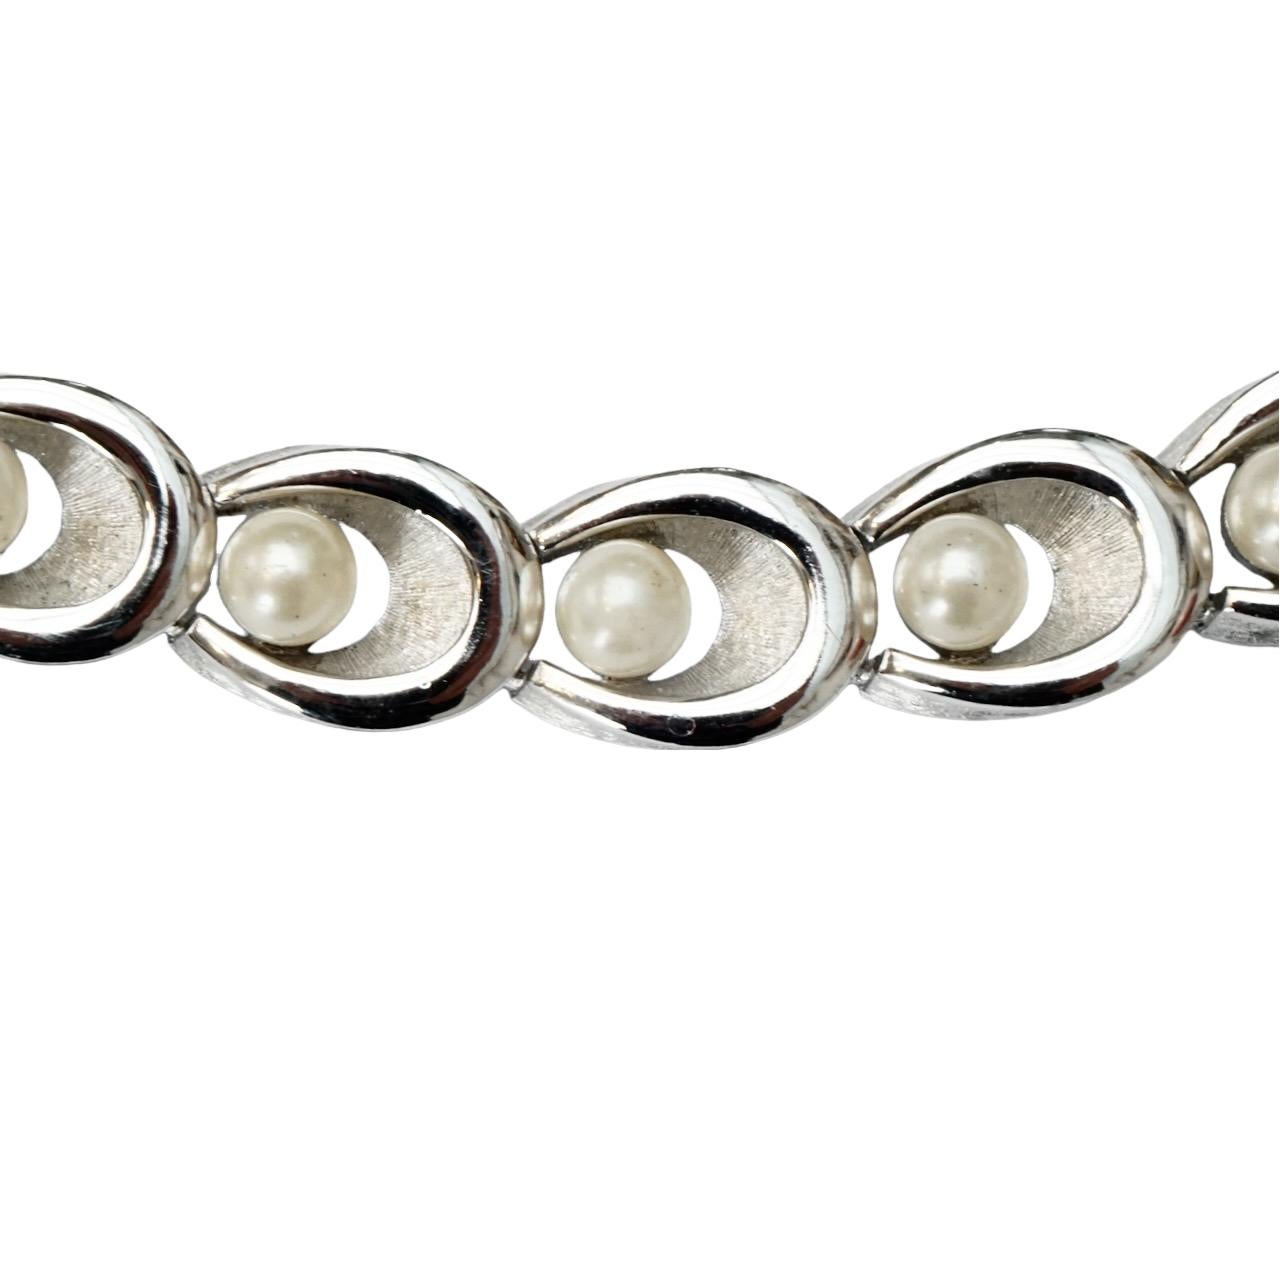 Trifari Silver Plated Brushed and Shiny Bracelet with Faux Pearls circa 1960s In Good Condition For Sale In London, GB